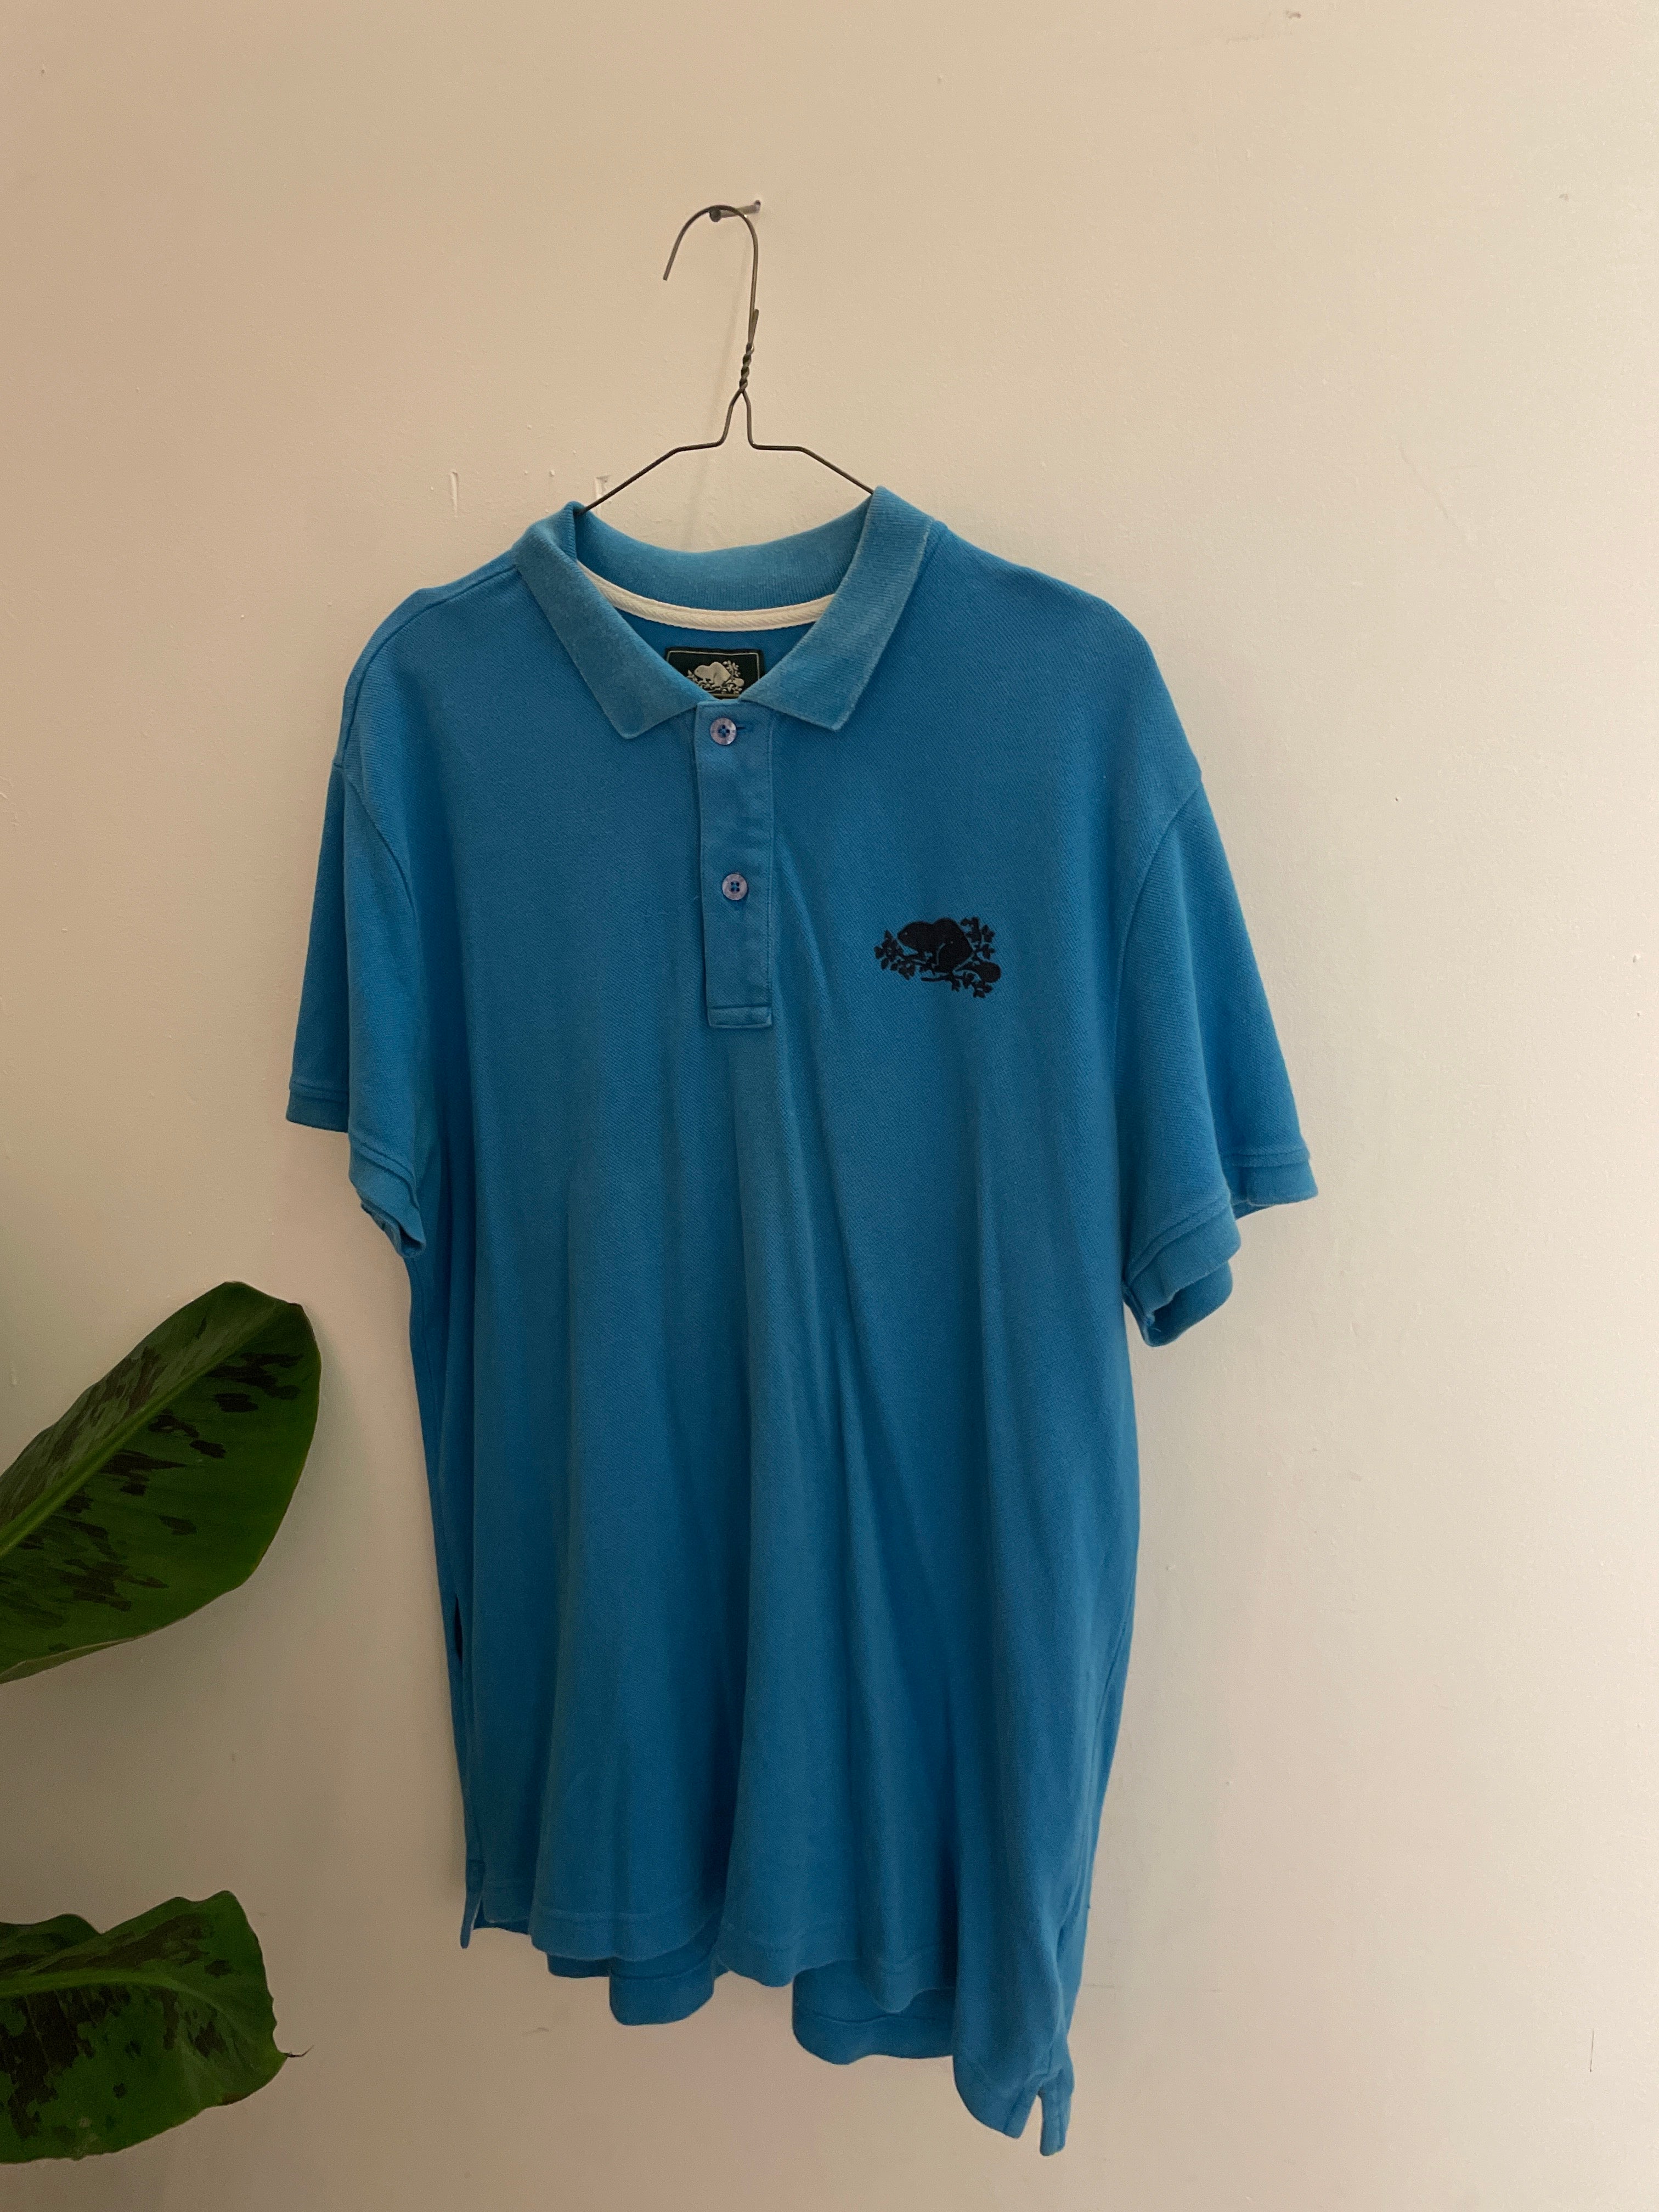 Vintage root canada mens blue polo shirt size XL